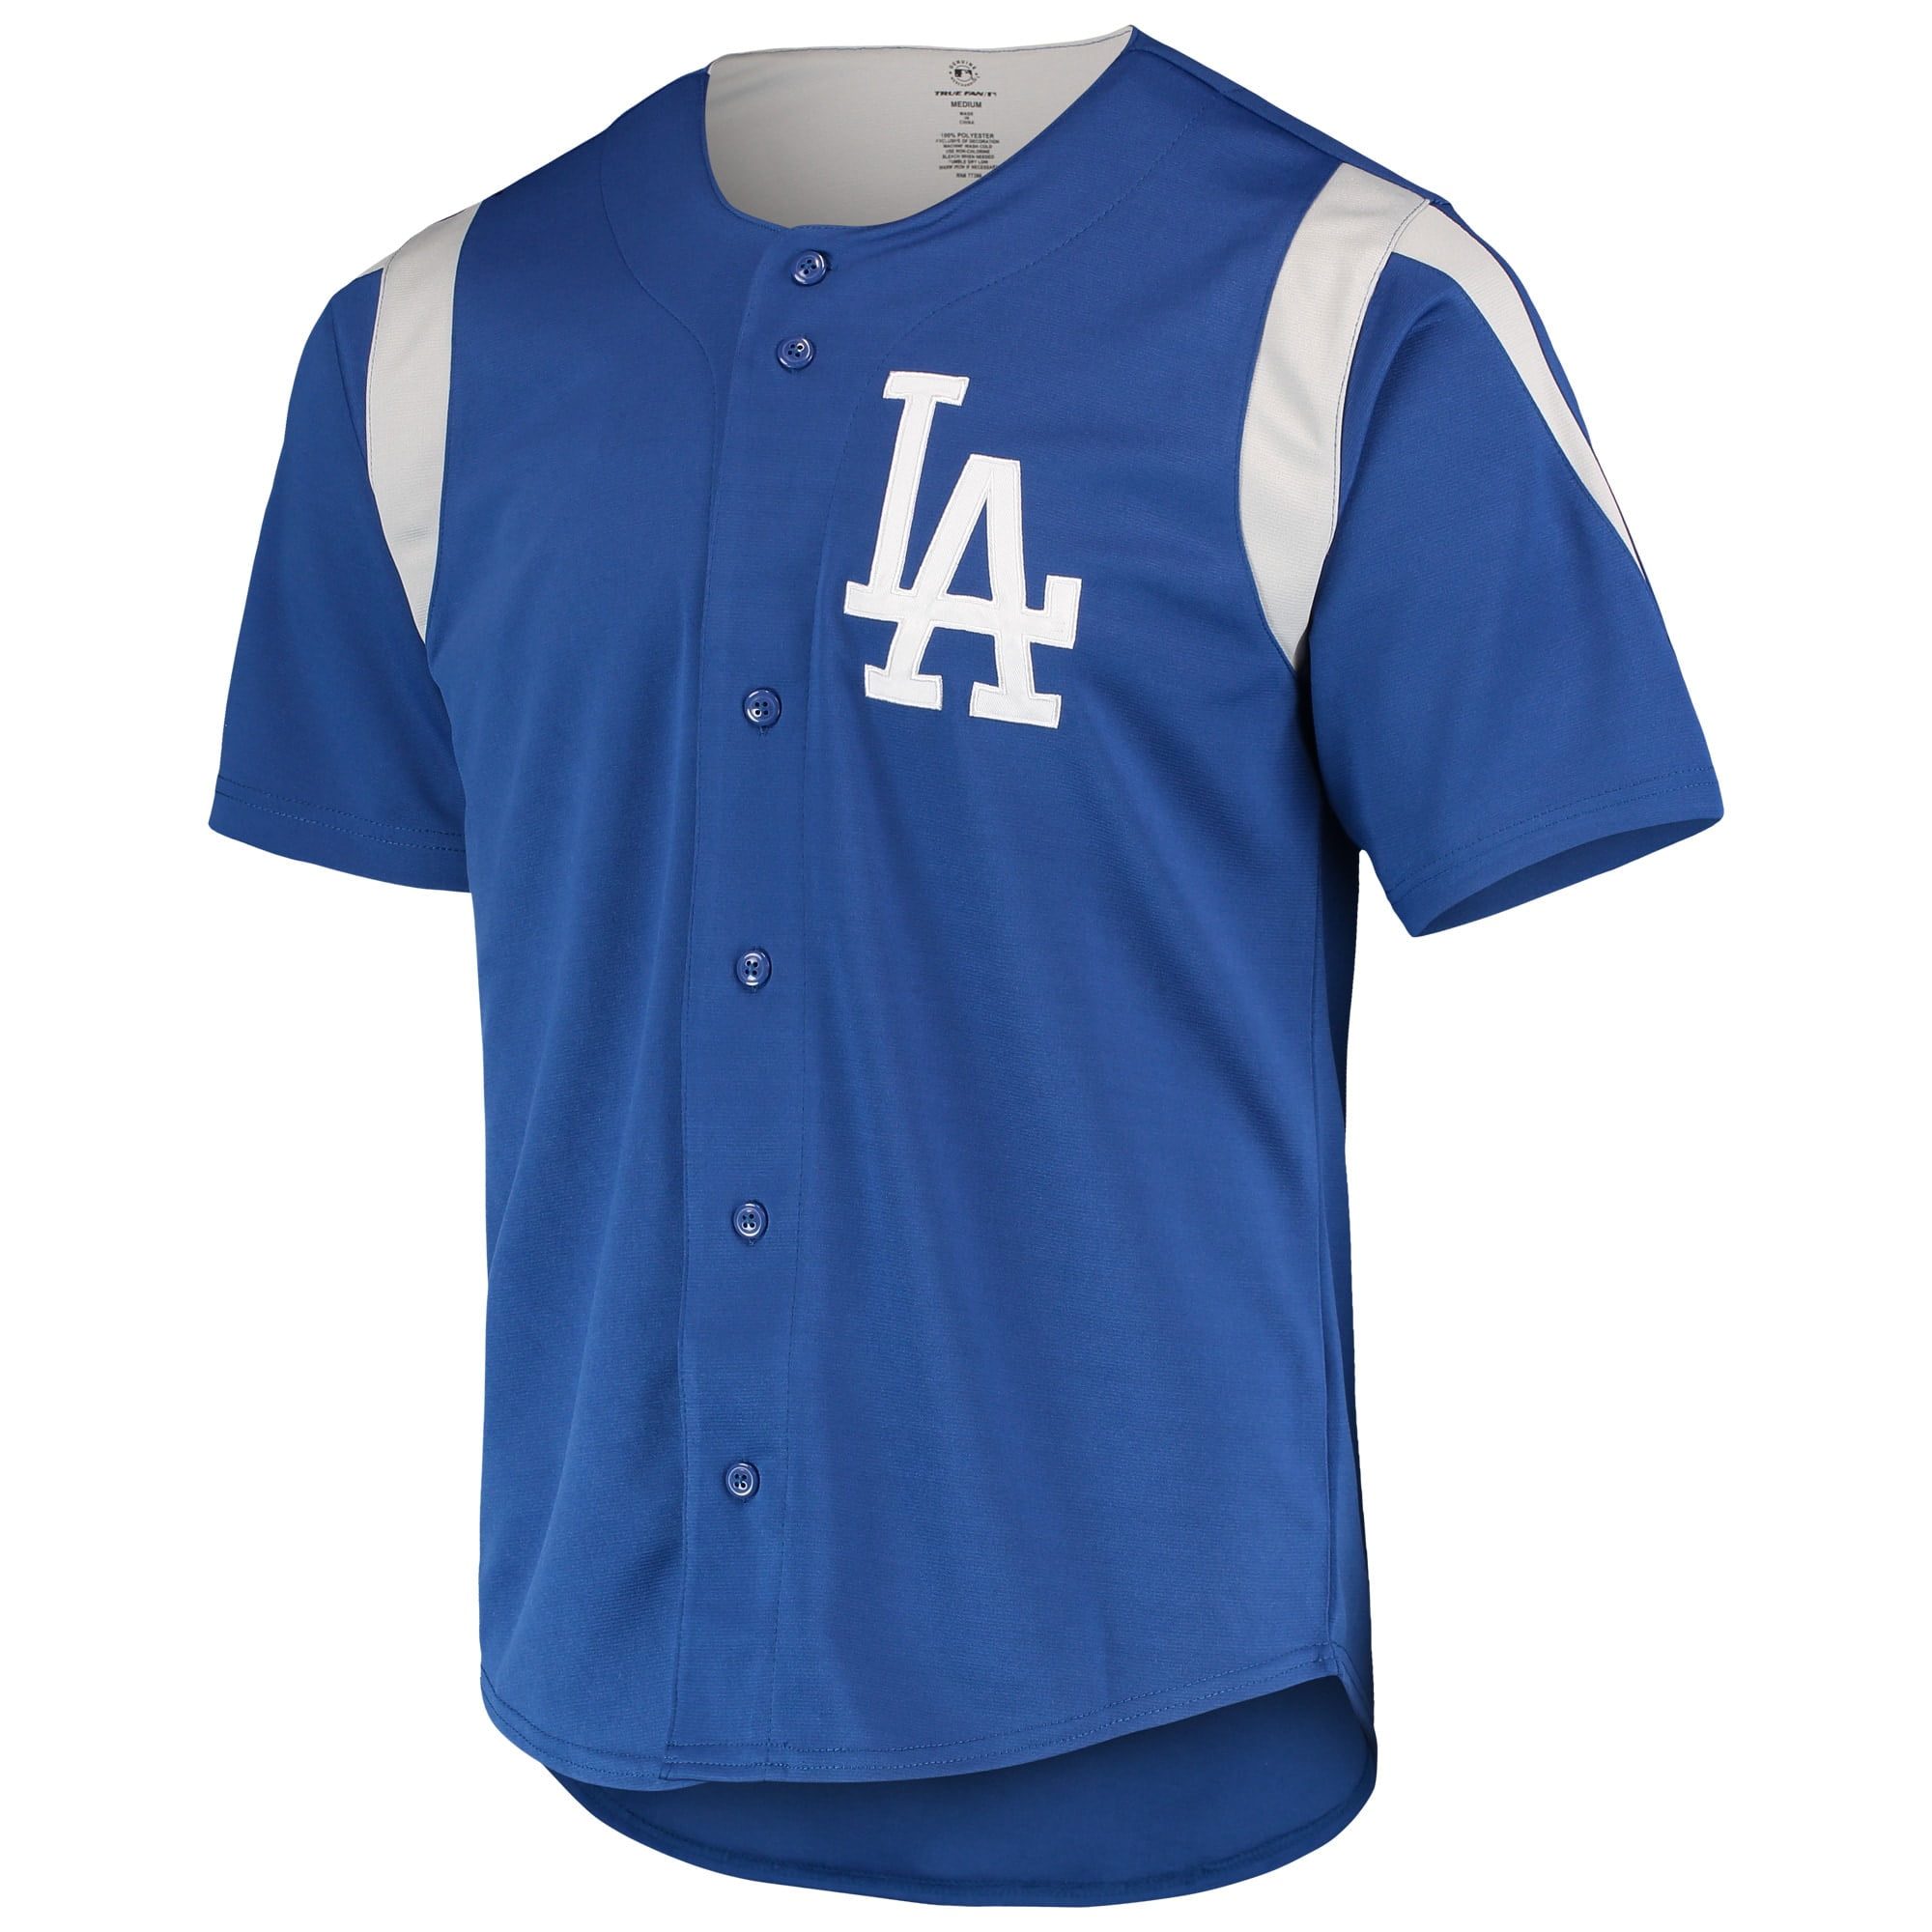 Mookie Betts Los Angeles Dodgers Autographed Gray Nike Authentic Jersey